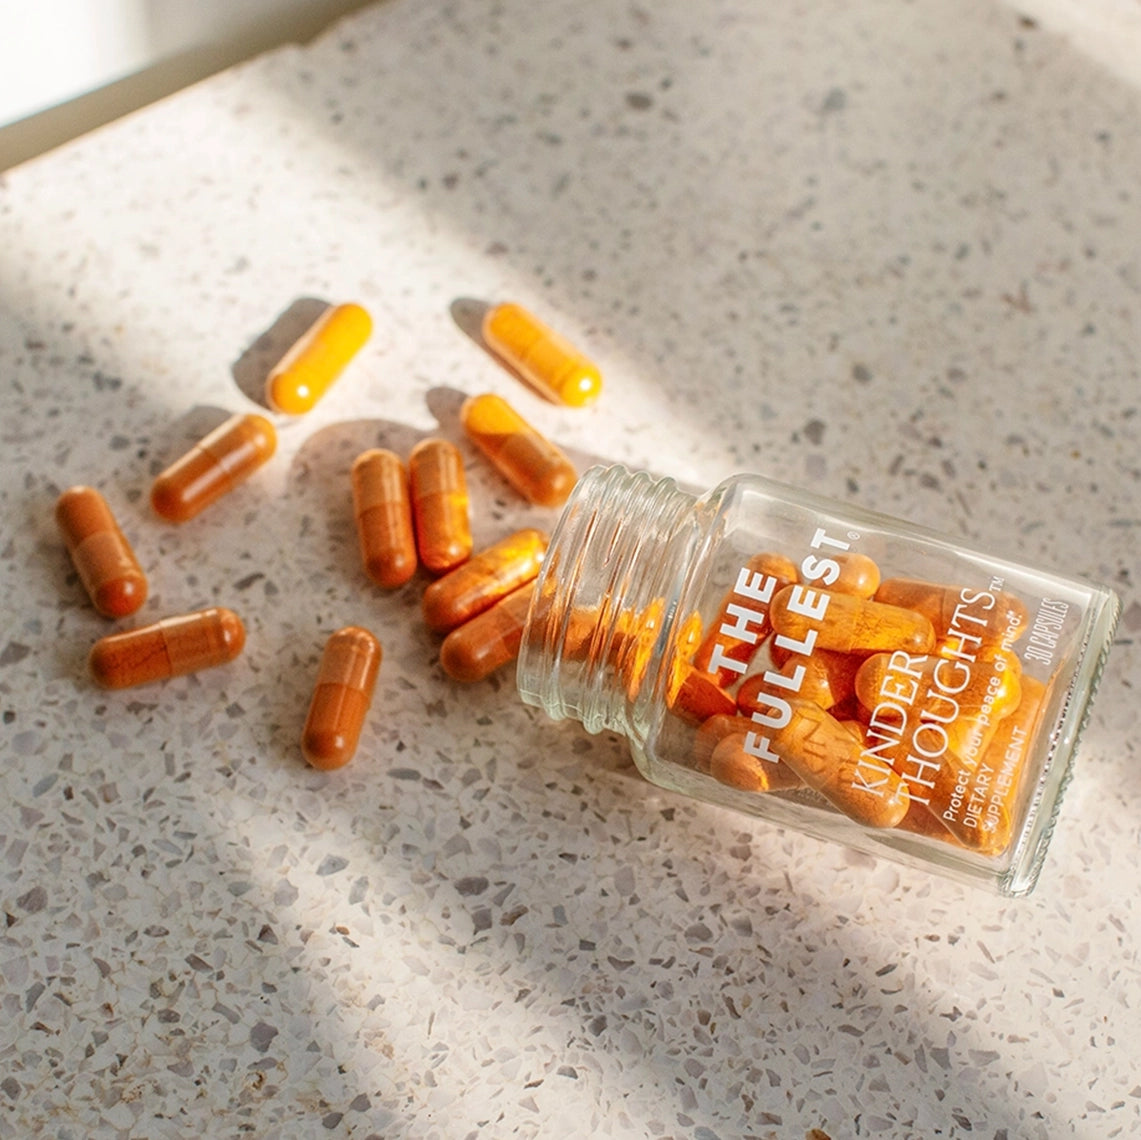 A bottle of orange saffron and turmeric capsules spilled on a sunlit counter, with capsules scattered around the open container.